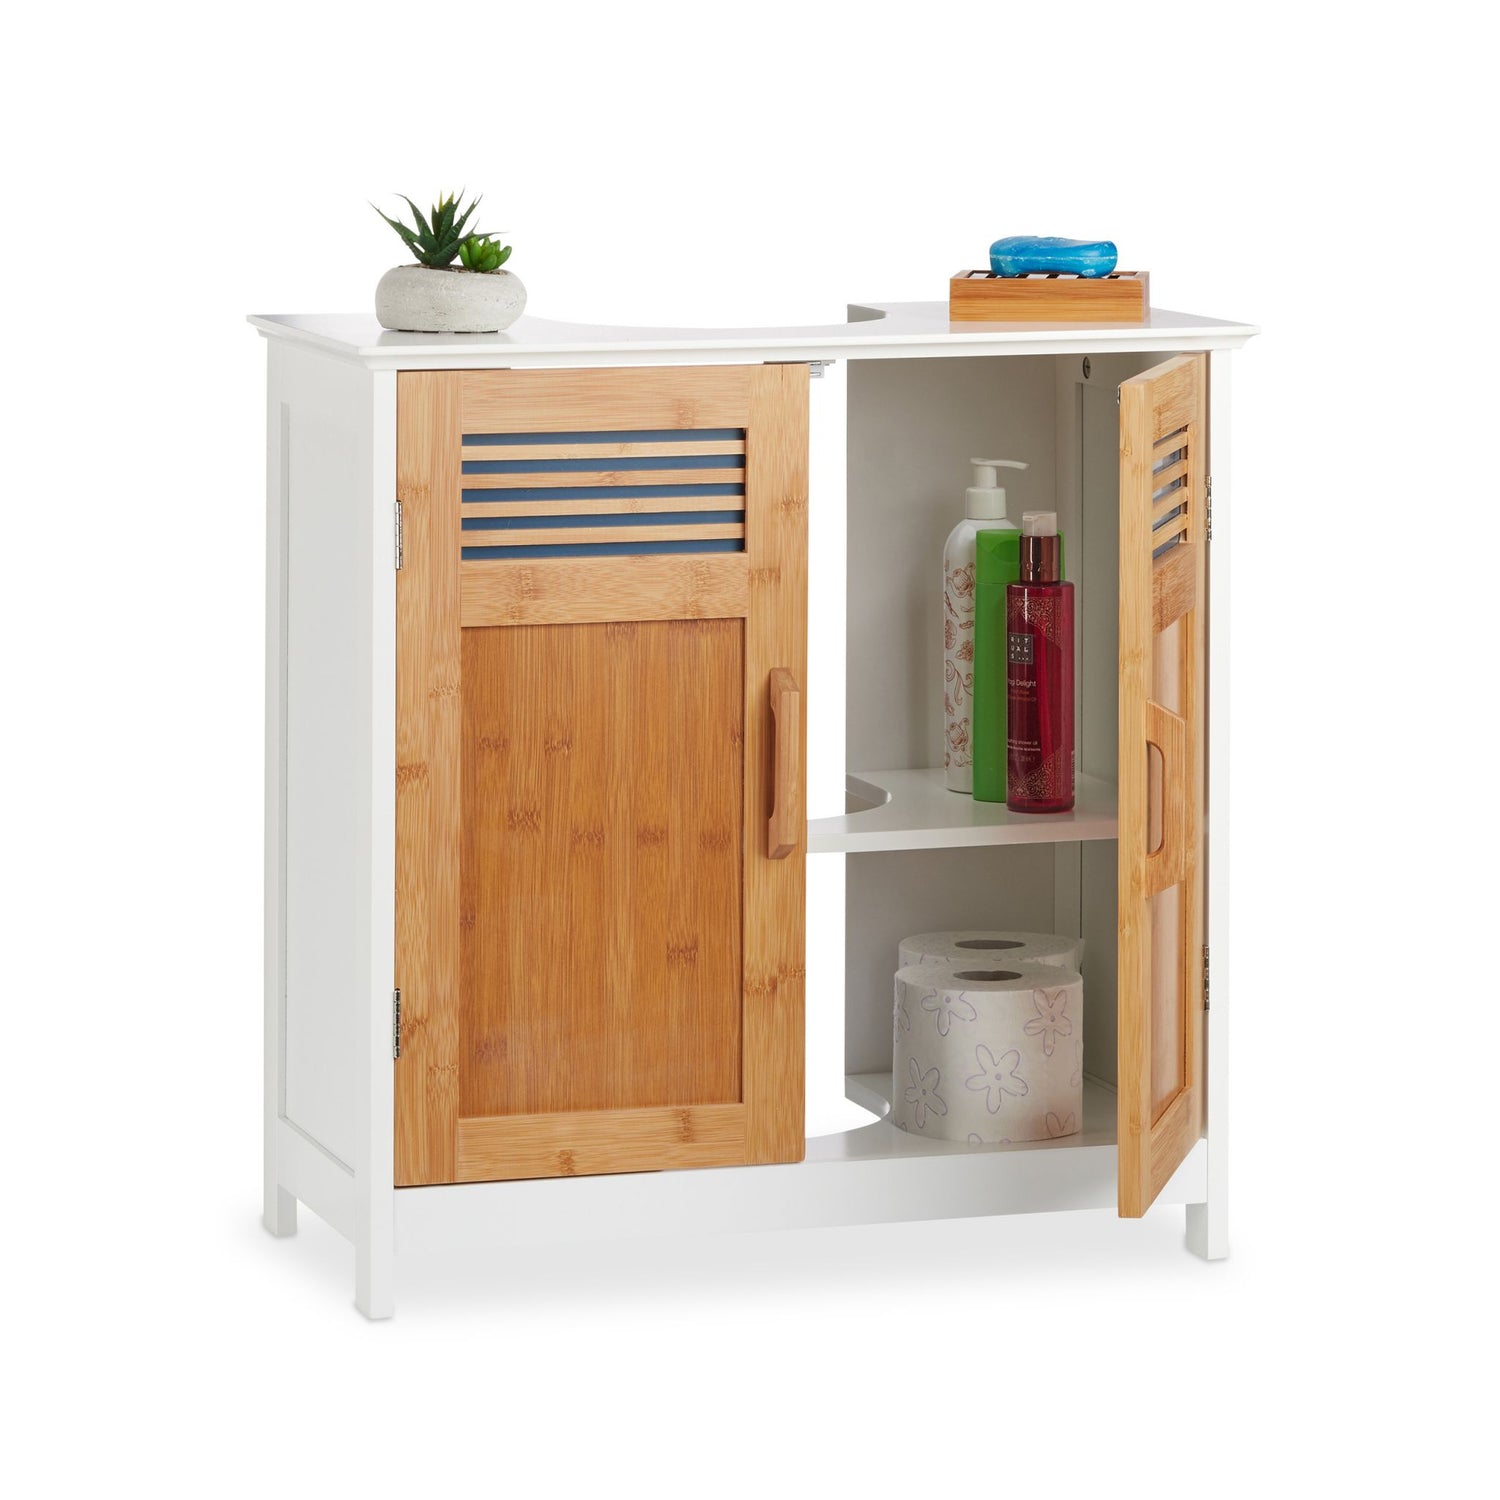 RelaxDays Under-Basin Cabinet with Bamboo Doors Bamboo Bathrooms